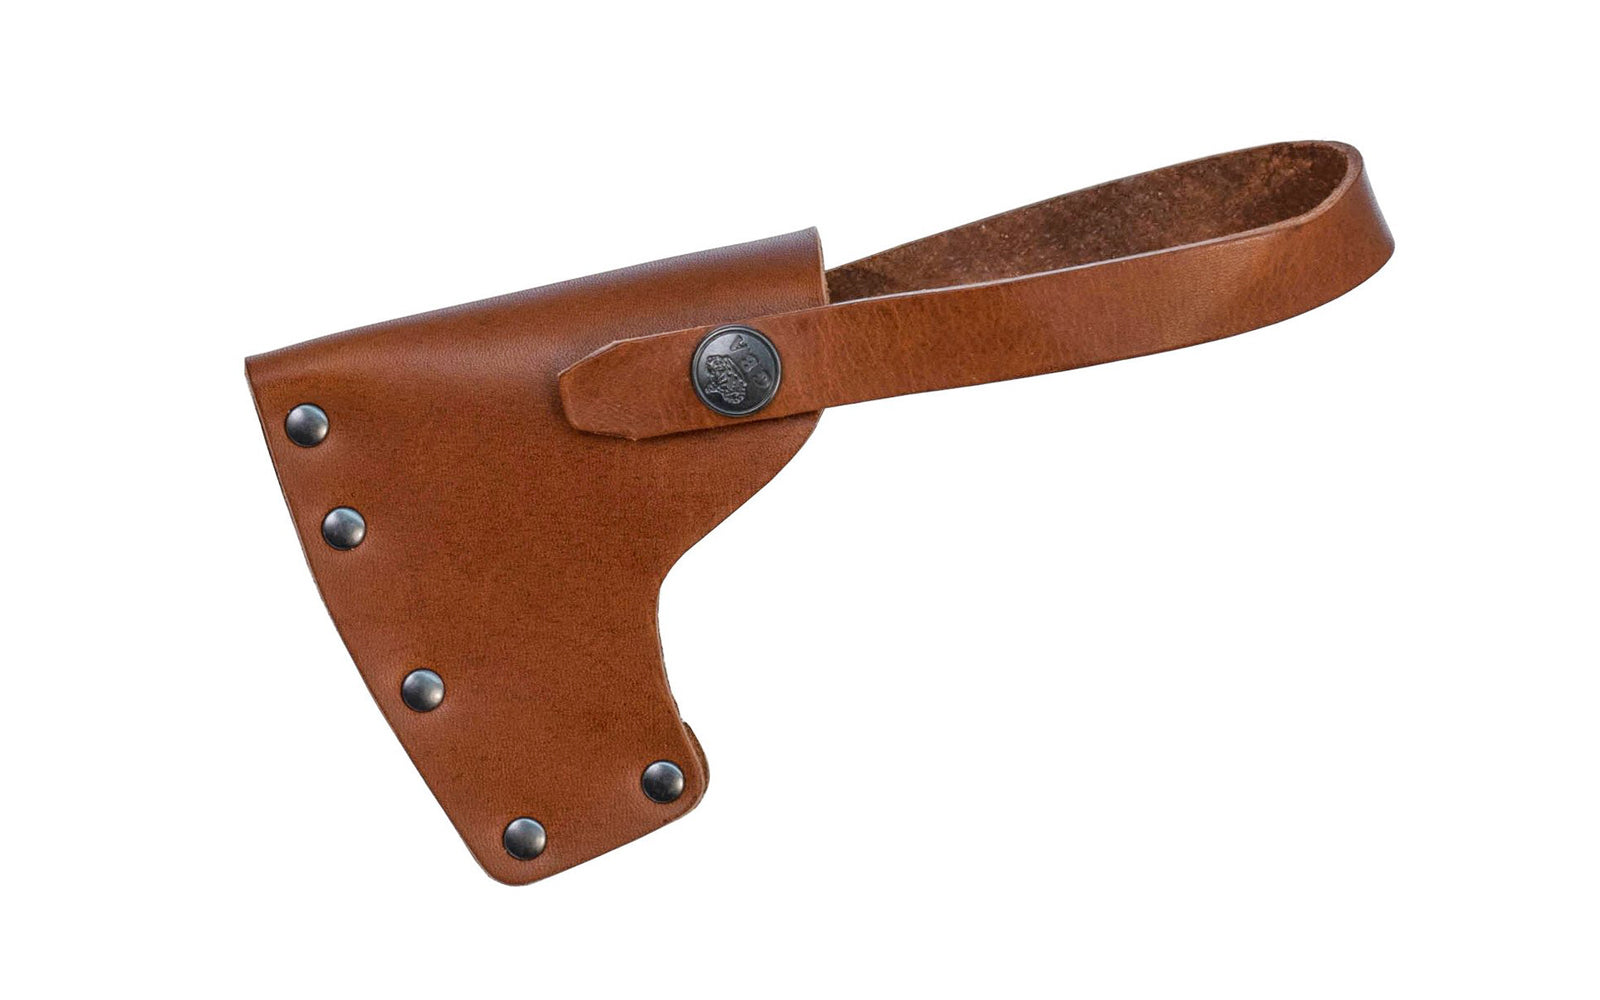 Gränsfors Bruk grain leather sheath is designed for the Splitting Hatchet No. 439 & Small Splitting Axe No. 441. The vegetable-tanned leather is free from heavy metals & is biodegradable. 7391765441089. Model 441C